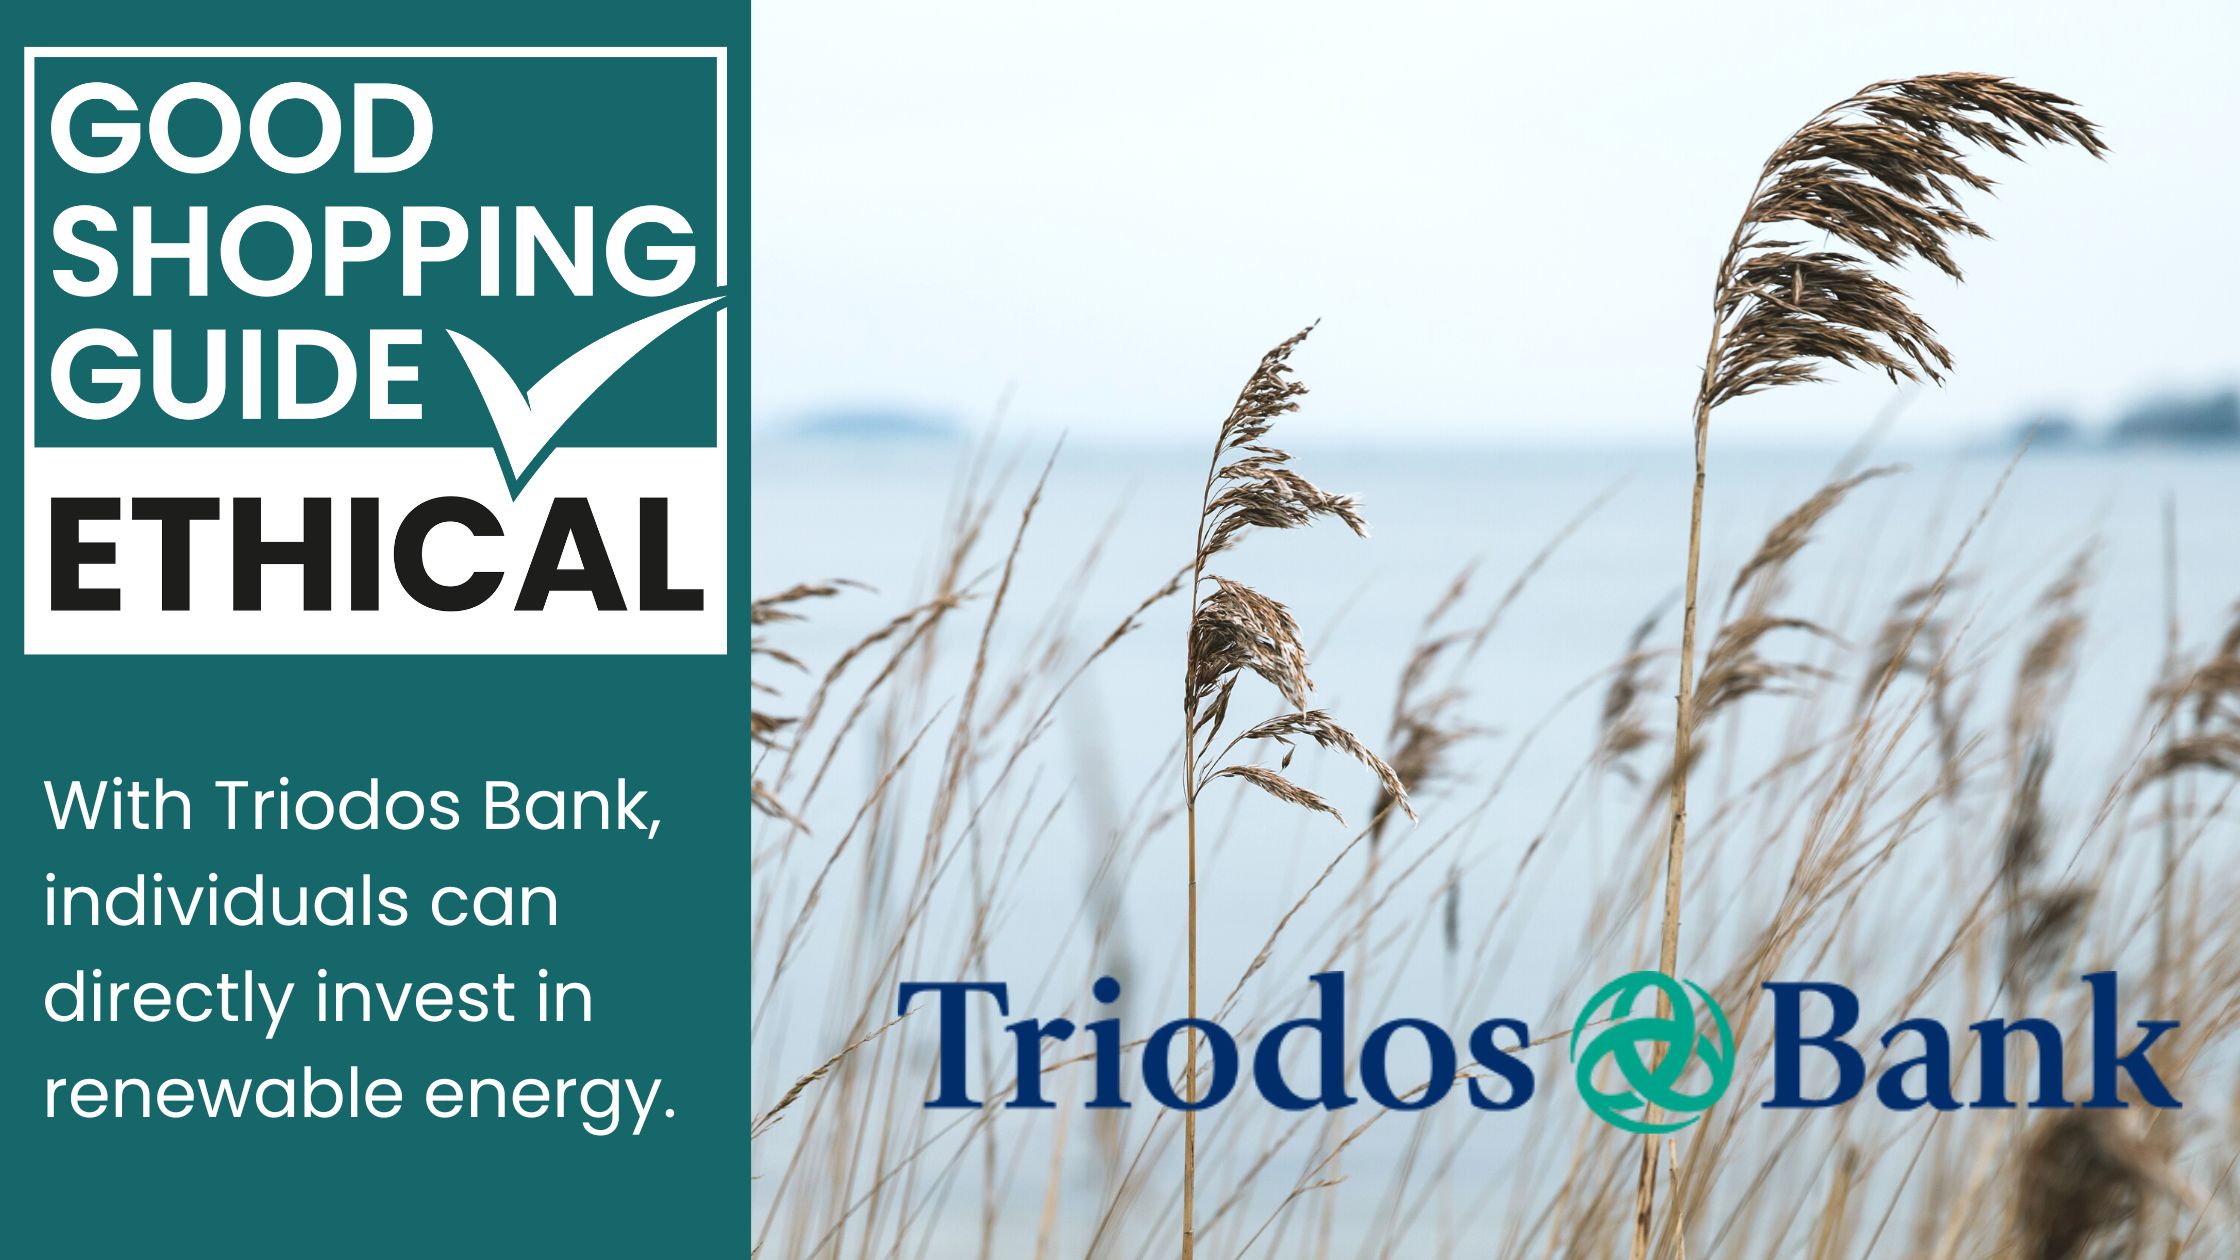 triodos bank and the good shopping guide ethical accreditation